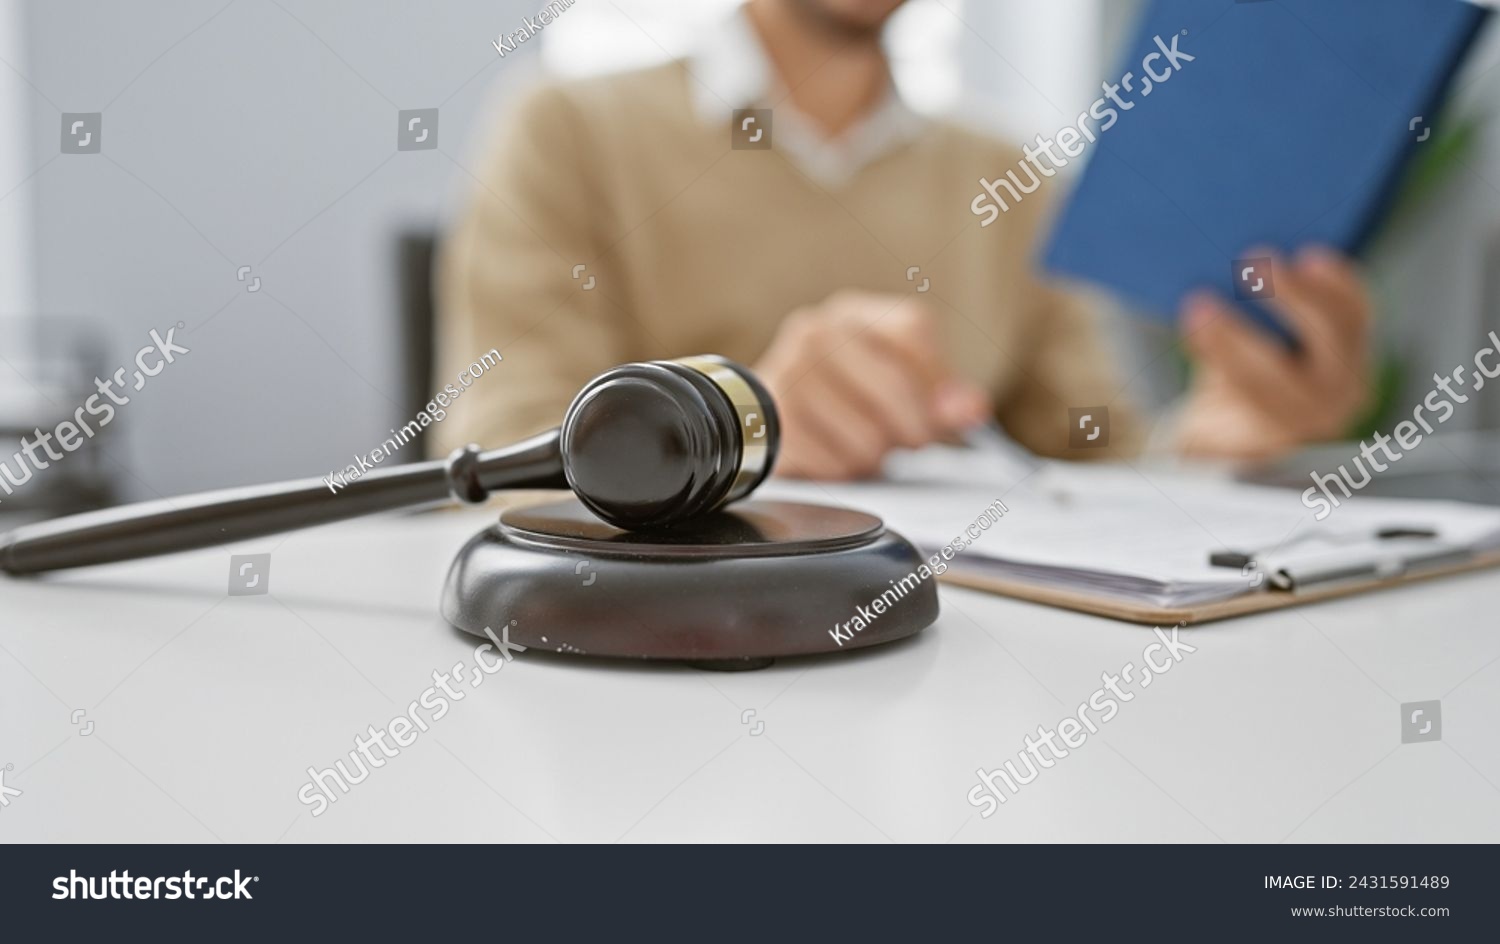 A focused man in a sweater reads a document in an office with gavel foreground emphasizing legal or judicial context. #2431591489